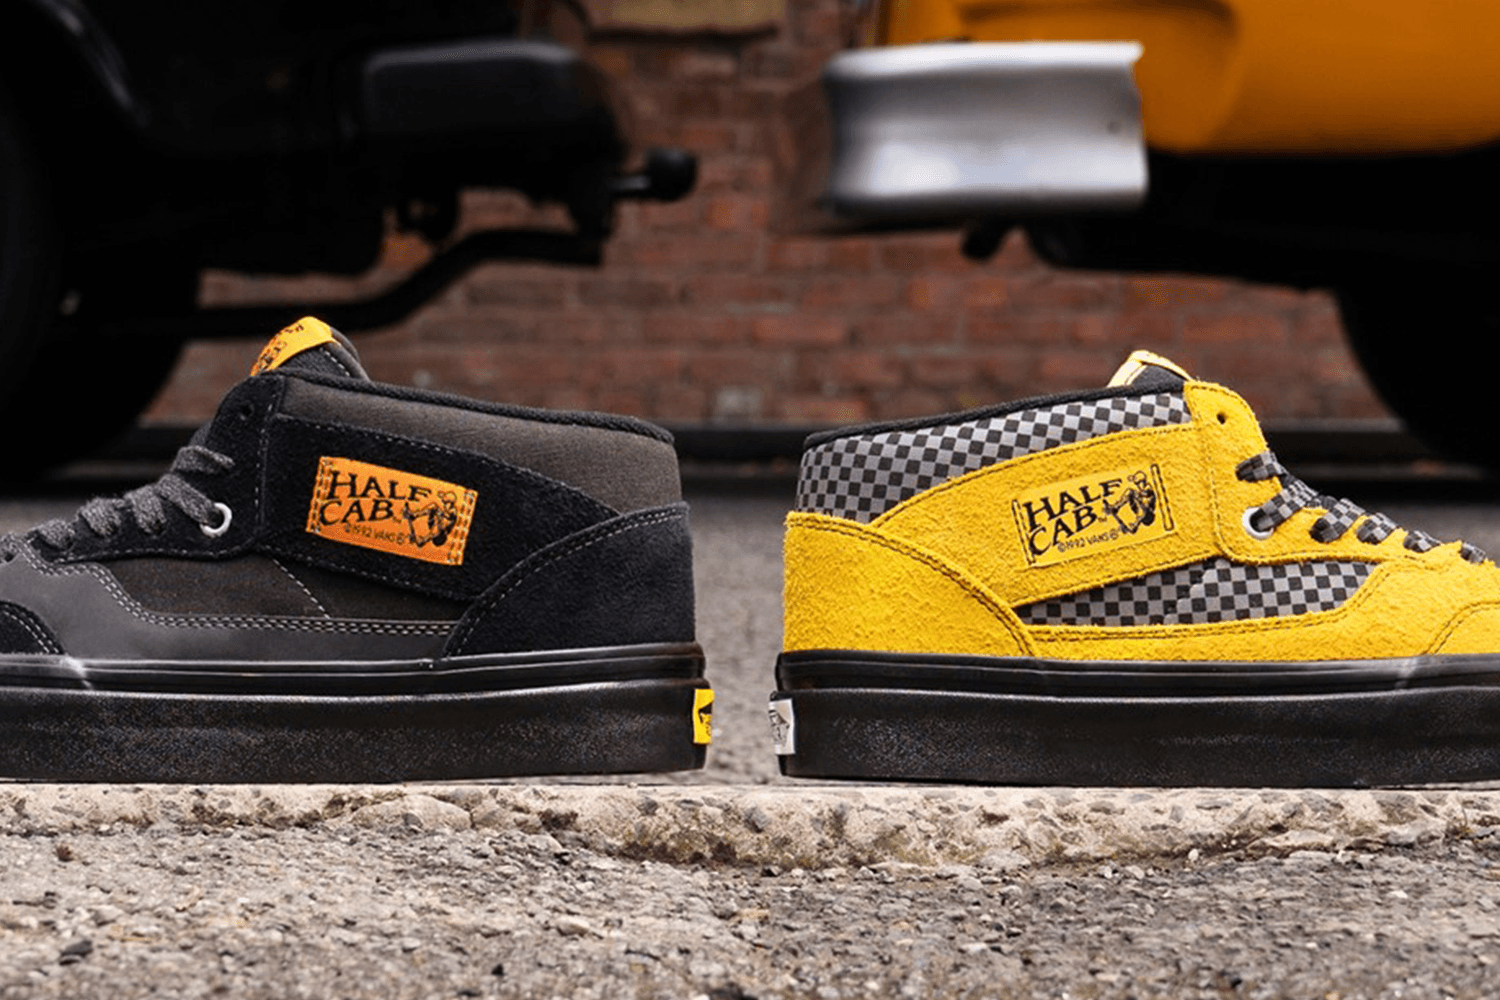 Take a look at the exclusive Size? x Vans Half Cab 'Taxi' pack